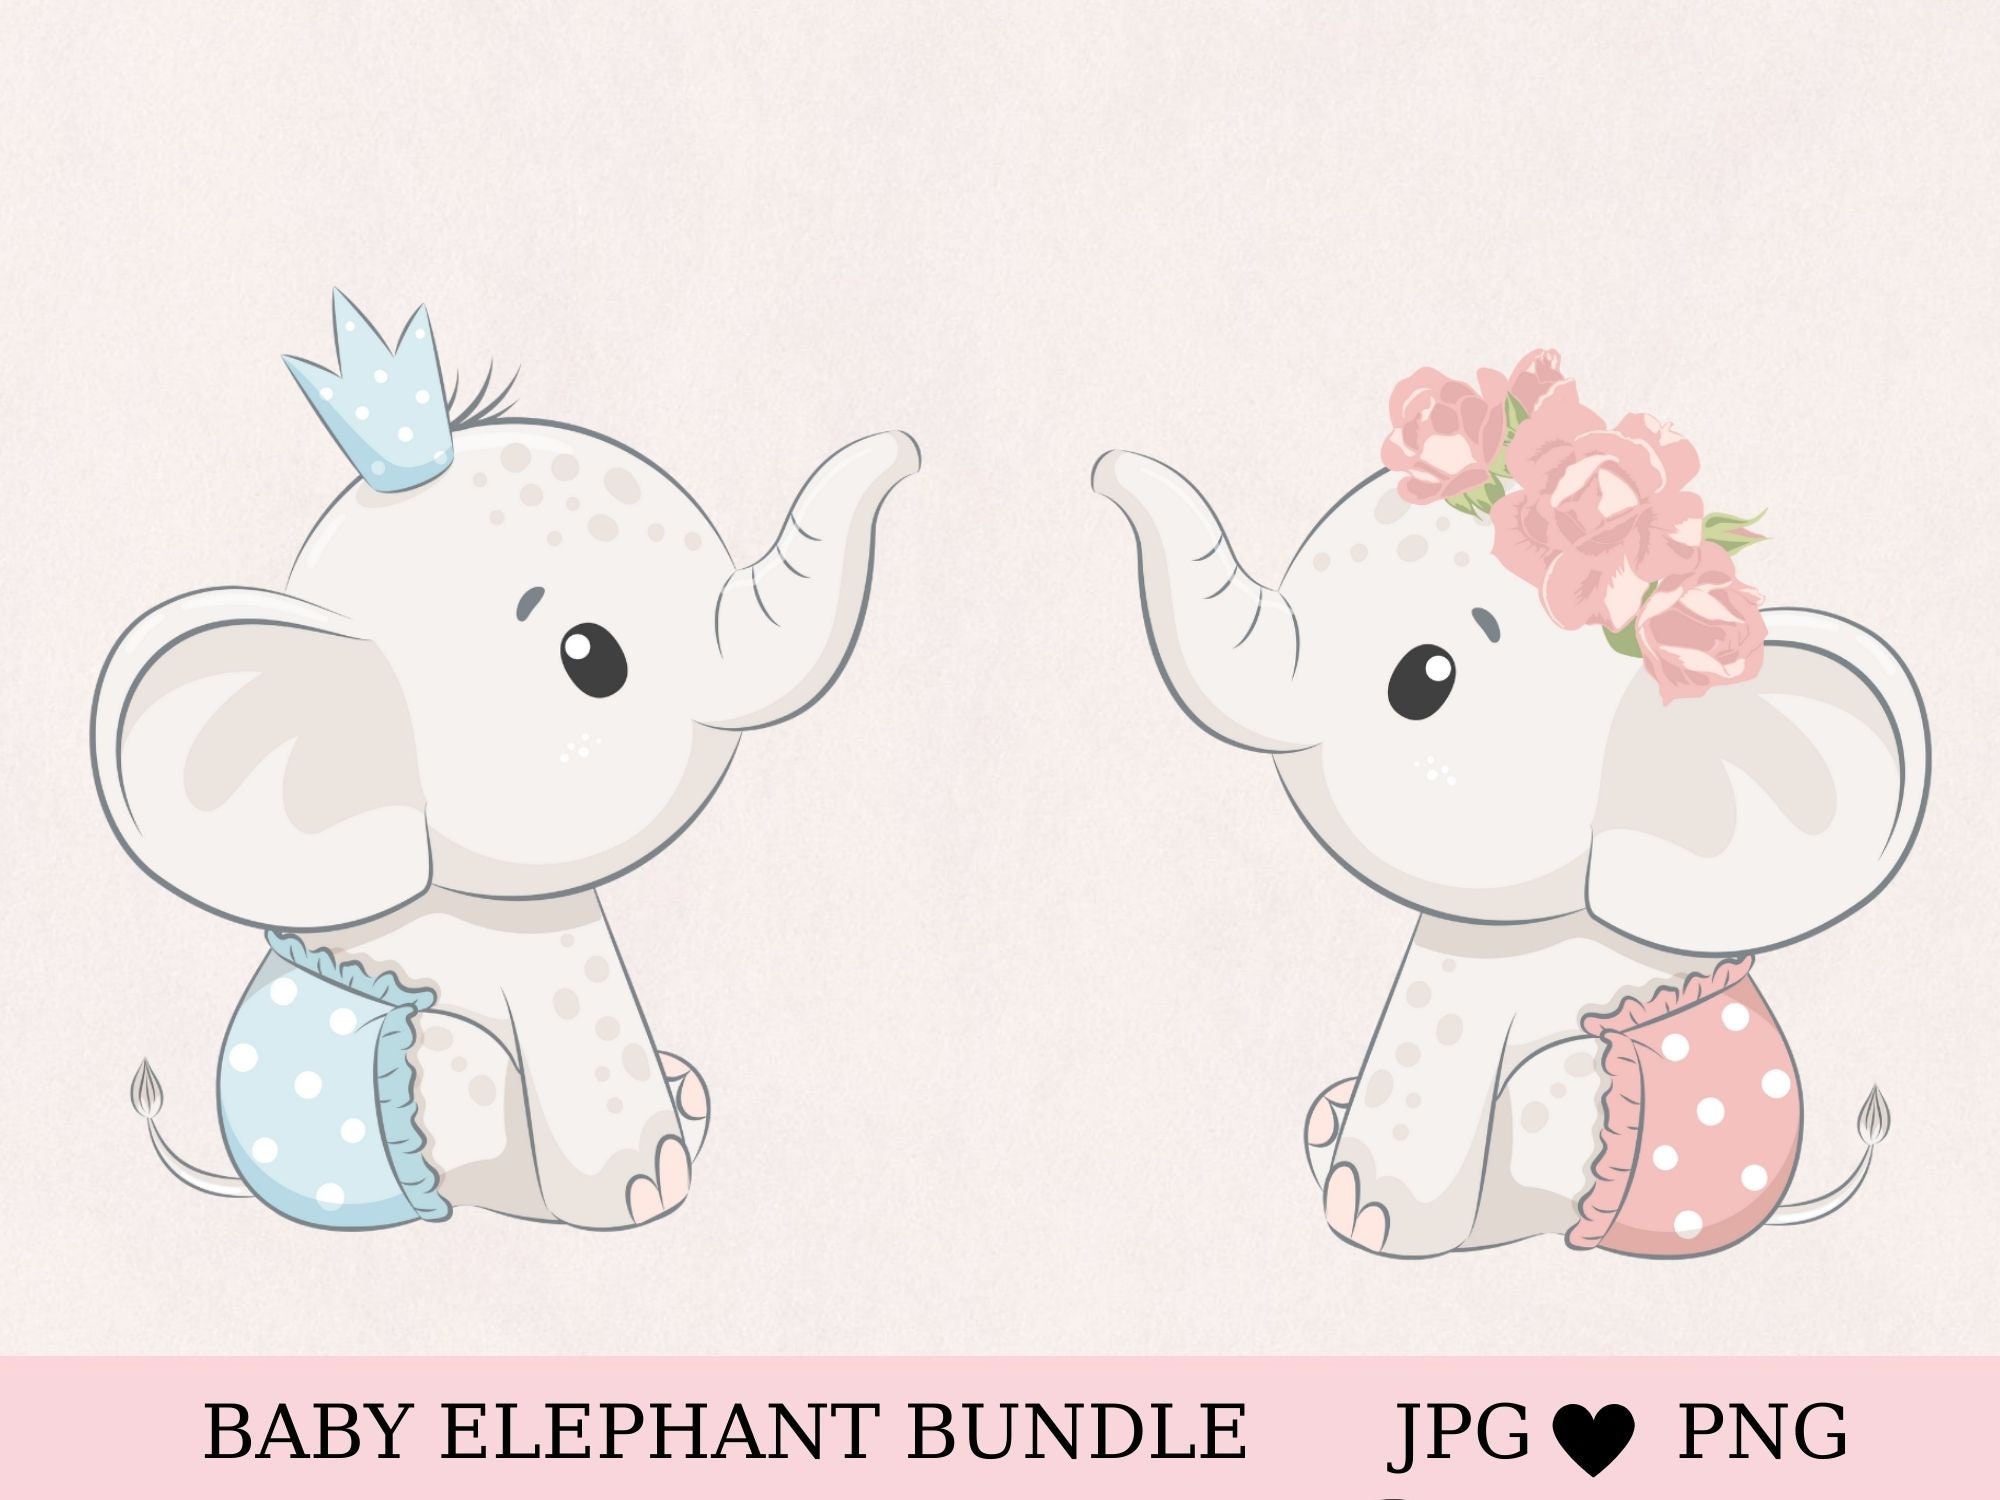 New Baby Gift Wrap for Baby Boys or Girls Cute Elephant Neutral